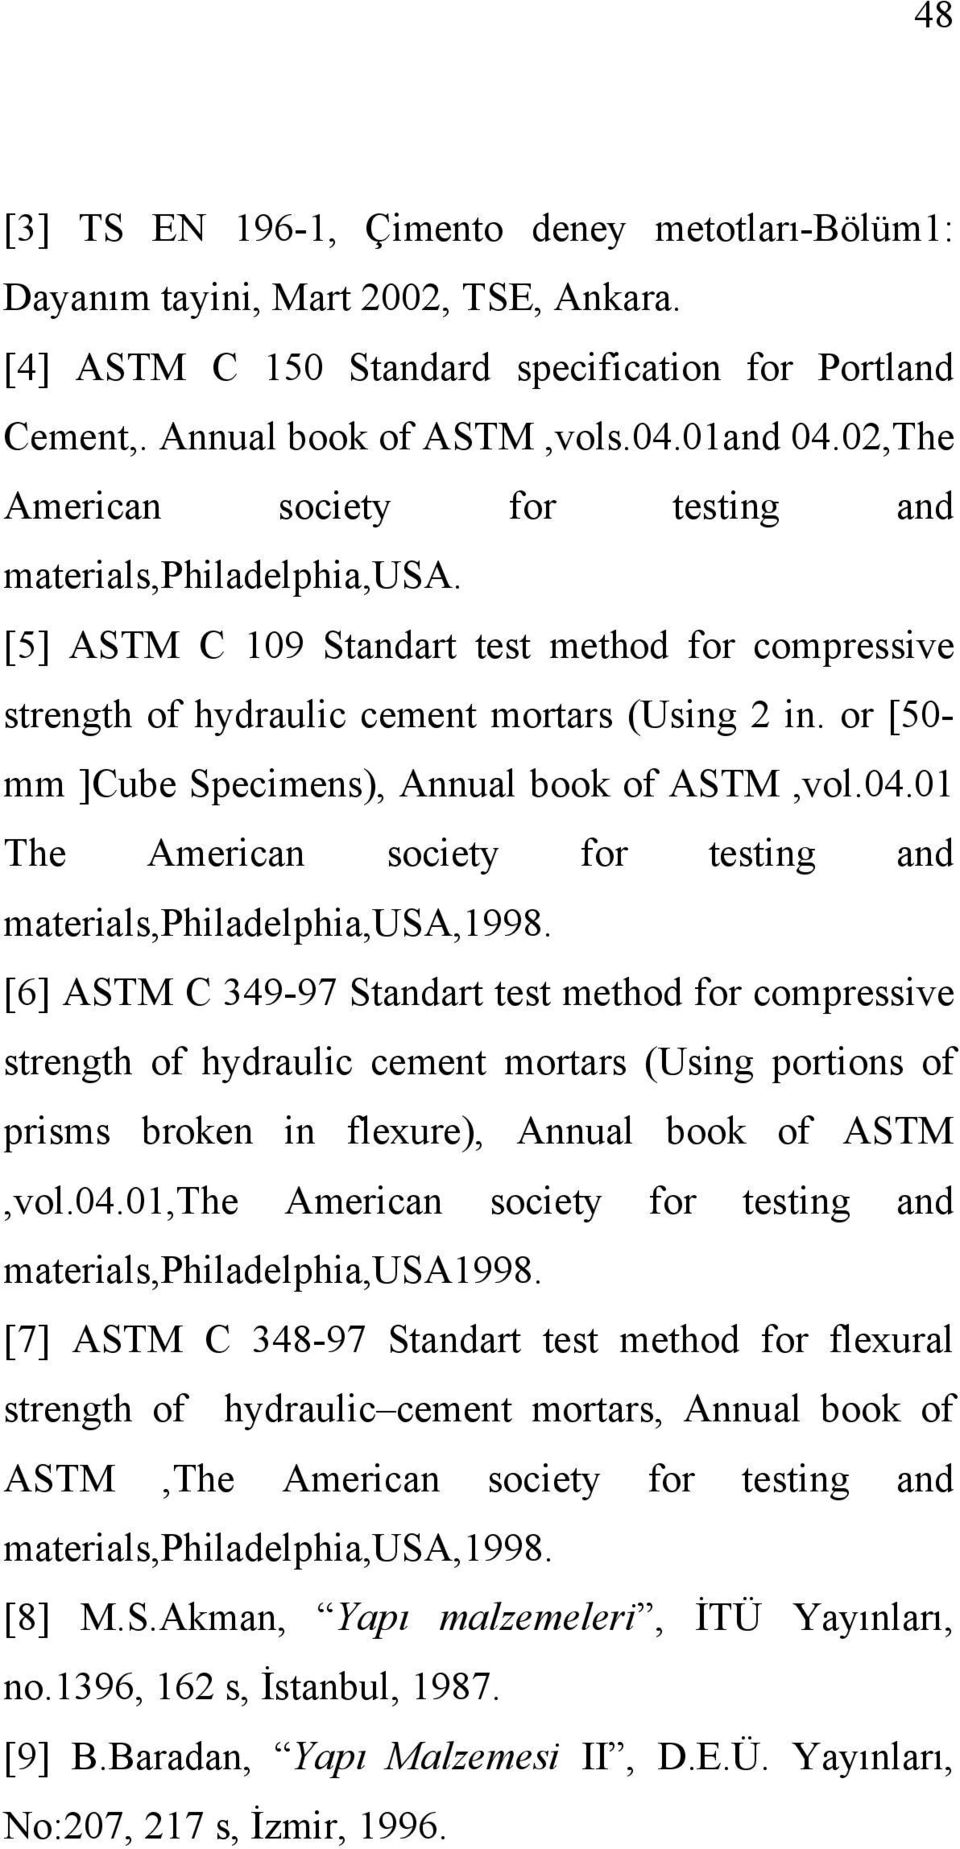 or [50- mm ]Cube Specimens), Annual book of ASTM,vol.04.01 The American society for testing and materials,philadelphia,usa,1998.